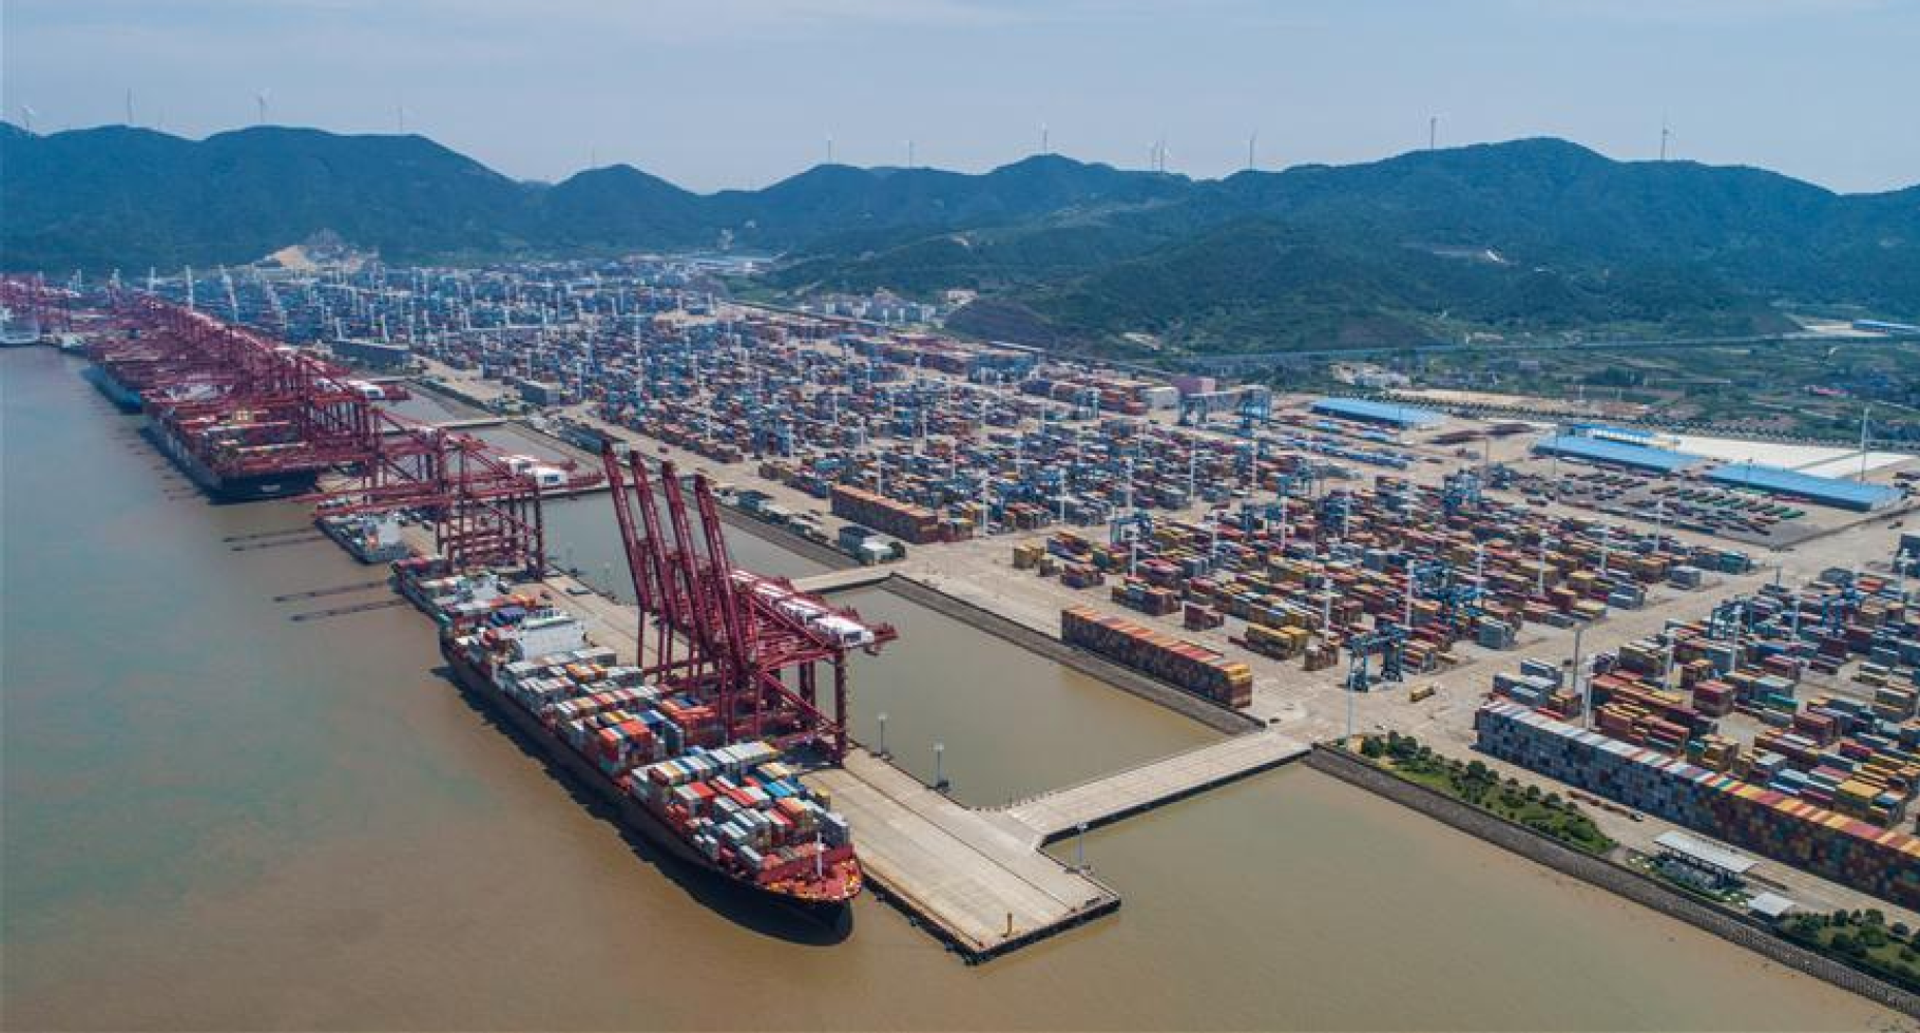 Aerial photo taken on July 12, 2017 shows the container pier of Zhoushan Port in Ningbo City, east China's Zhejiang Province. In the first half of 2017, Zhoushan Port handled 515 million tonnes cargoes, up 11.3 percent year-on-year, and 12.39 million TEU (twenty-foot equivalent unit) containers, up 14.6 percent year-on-year. - Sputnik International, 1920, 06.12.2021